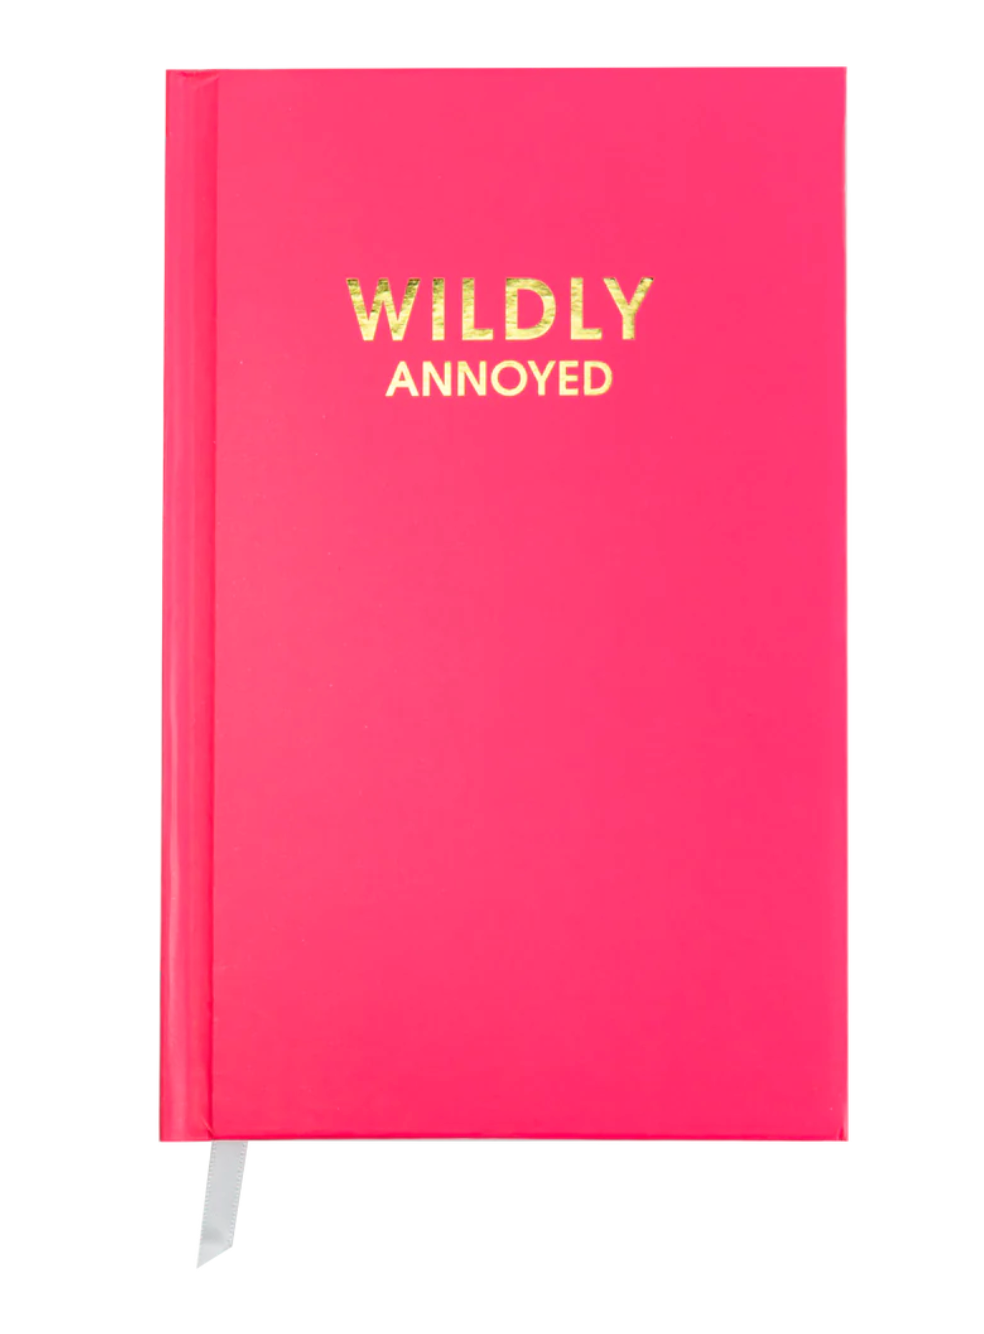 WILDLY ANNOYED - HOT PINK HARDCOVER JOURNAL